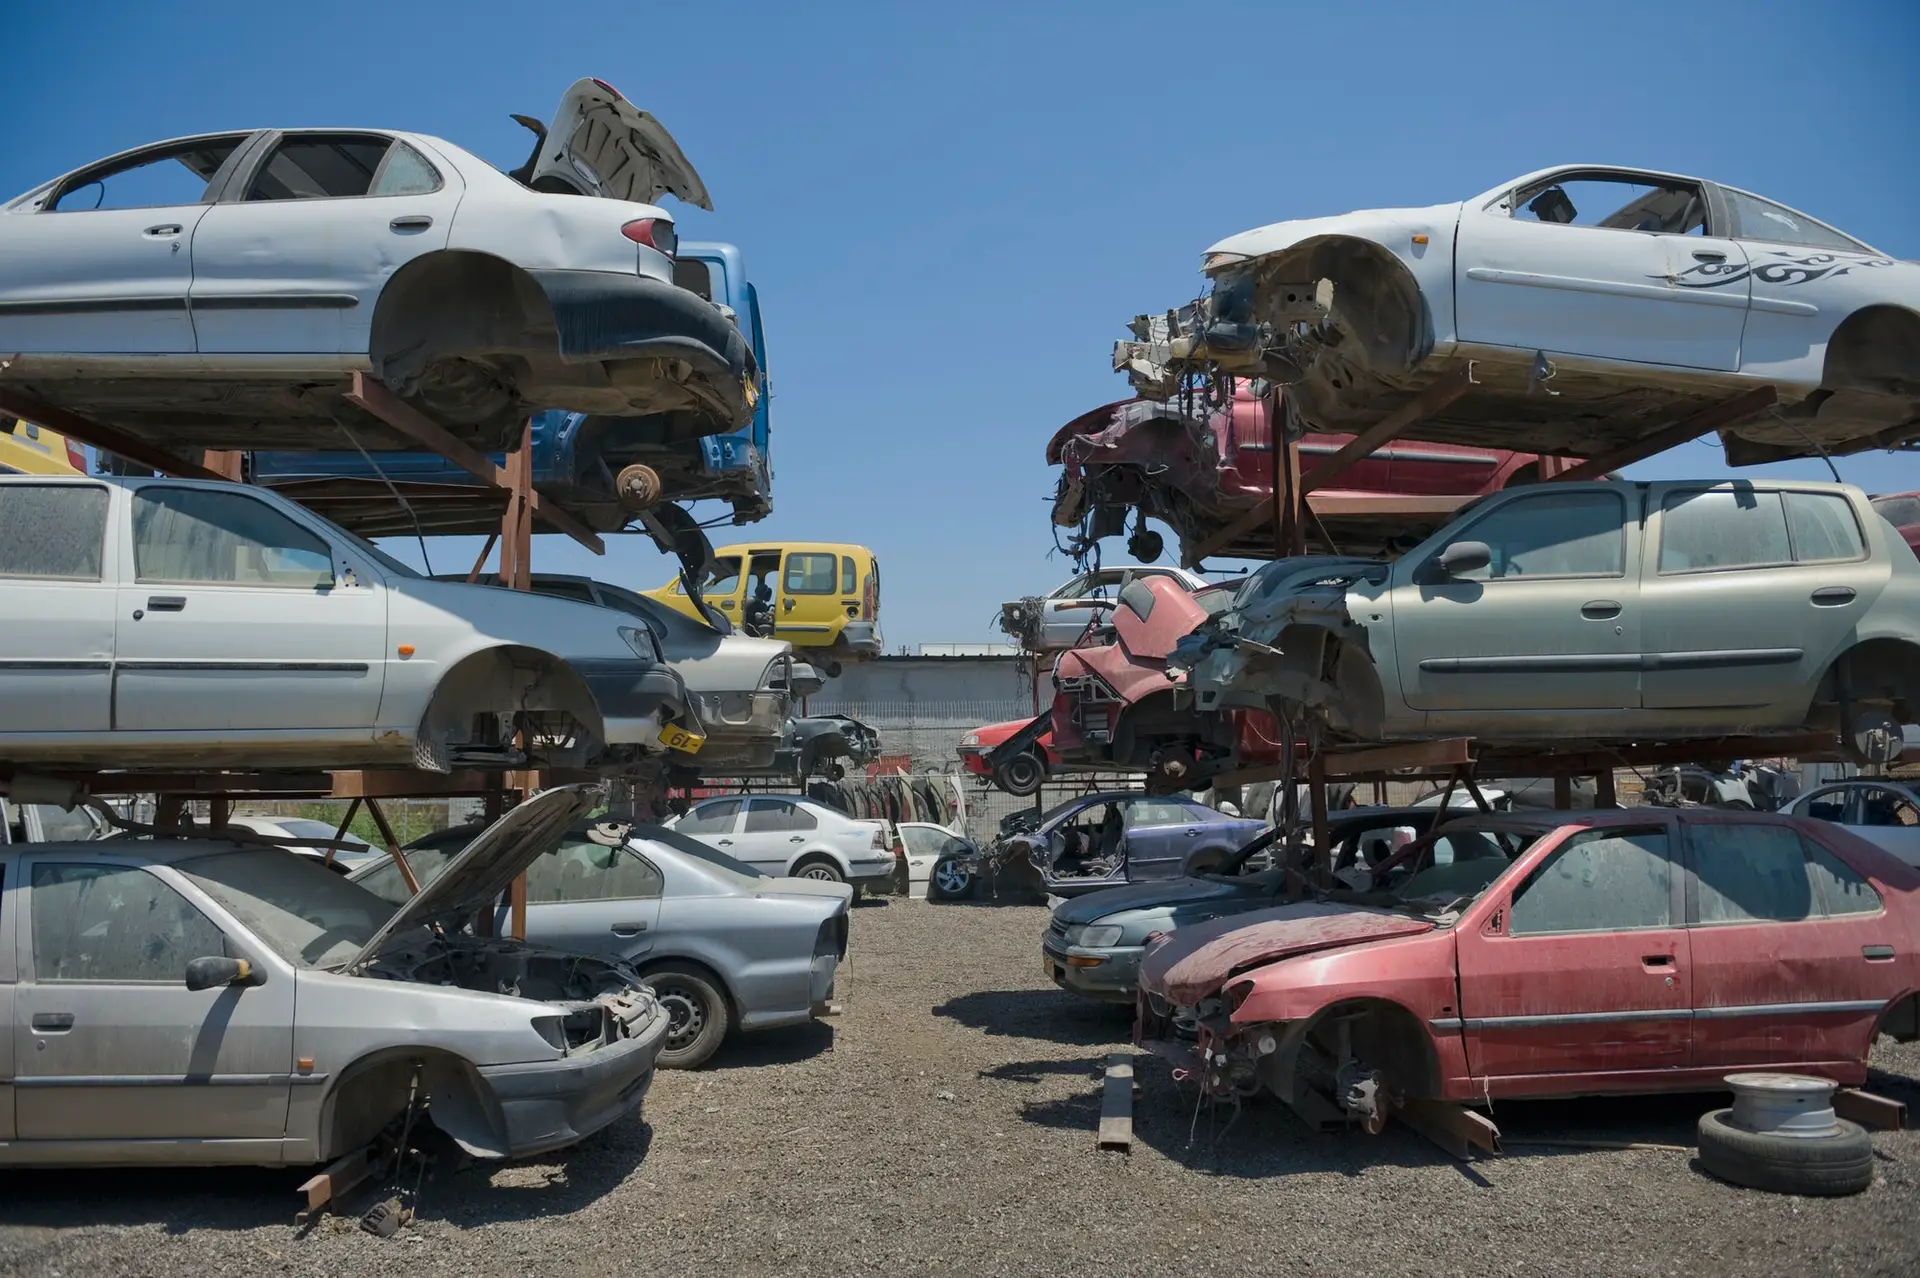 Some Easy Ideas On How To Get Rid Of Junk Cars 45039,Shot of Junkyard Cars